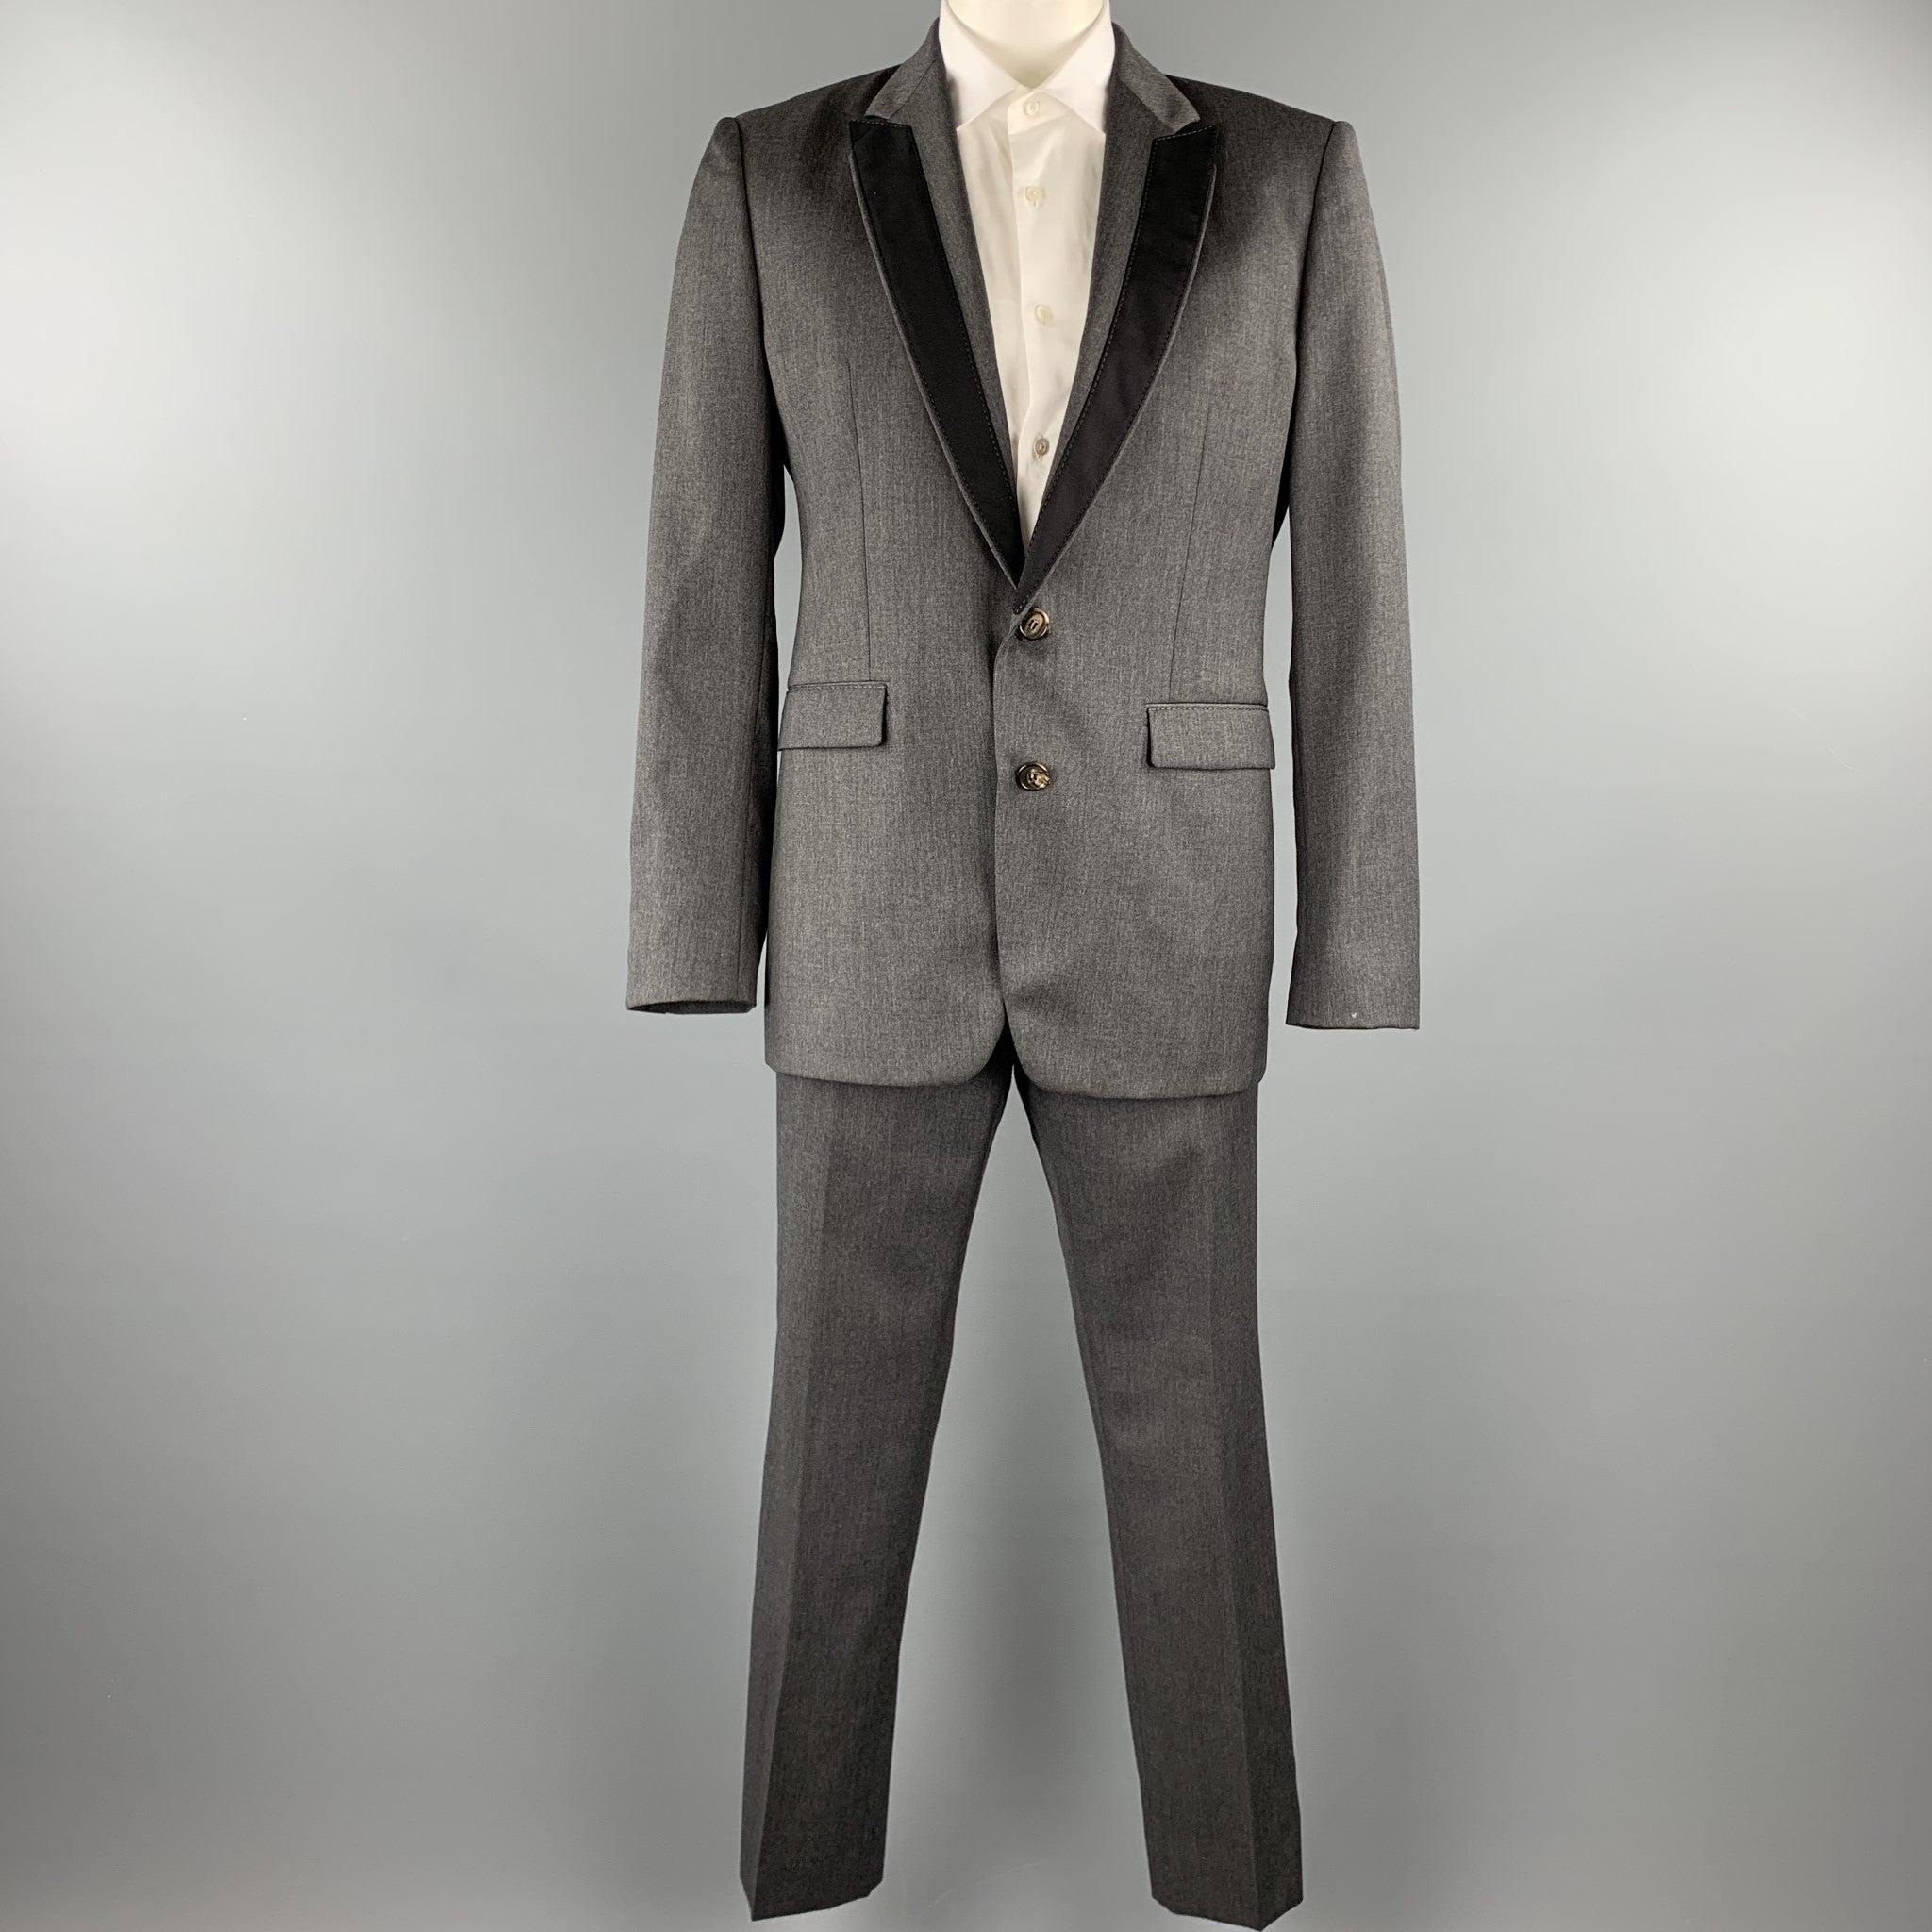 VIKTOR & ROLF suit comes in a dark gray wool and includes a single breasted, two button sport coat with a peak lapel, black trim detail, and matching front trousers. Made in Italy.Excellent Pre-Owned Condition. 

Marked:   52 

Measurements: 
 